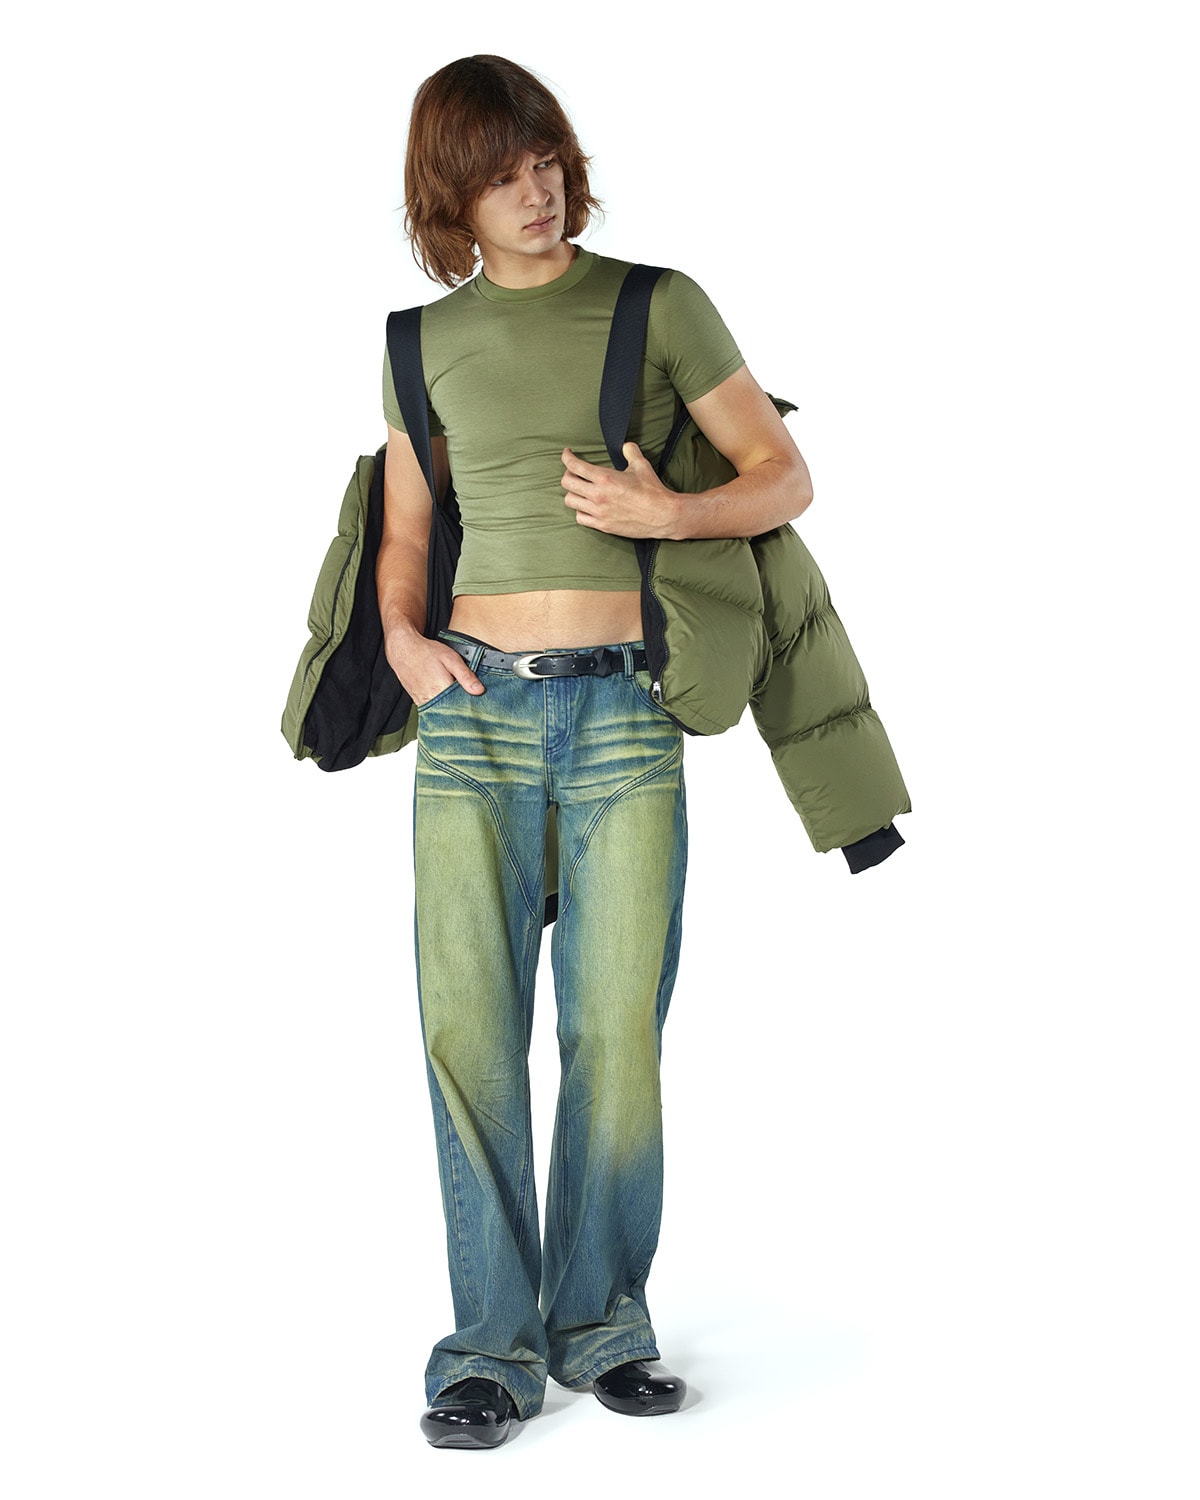 fax copy express* shell clog fw 2022 collection eva rubber futuristic cocoon knit sweater cardigan dirty wash denim relaxed-cut trouser wardrobe essentials